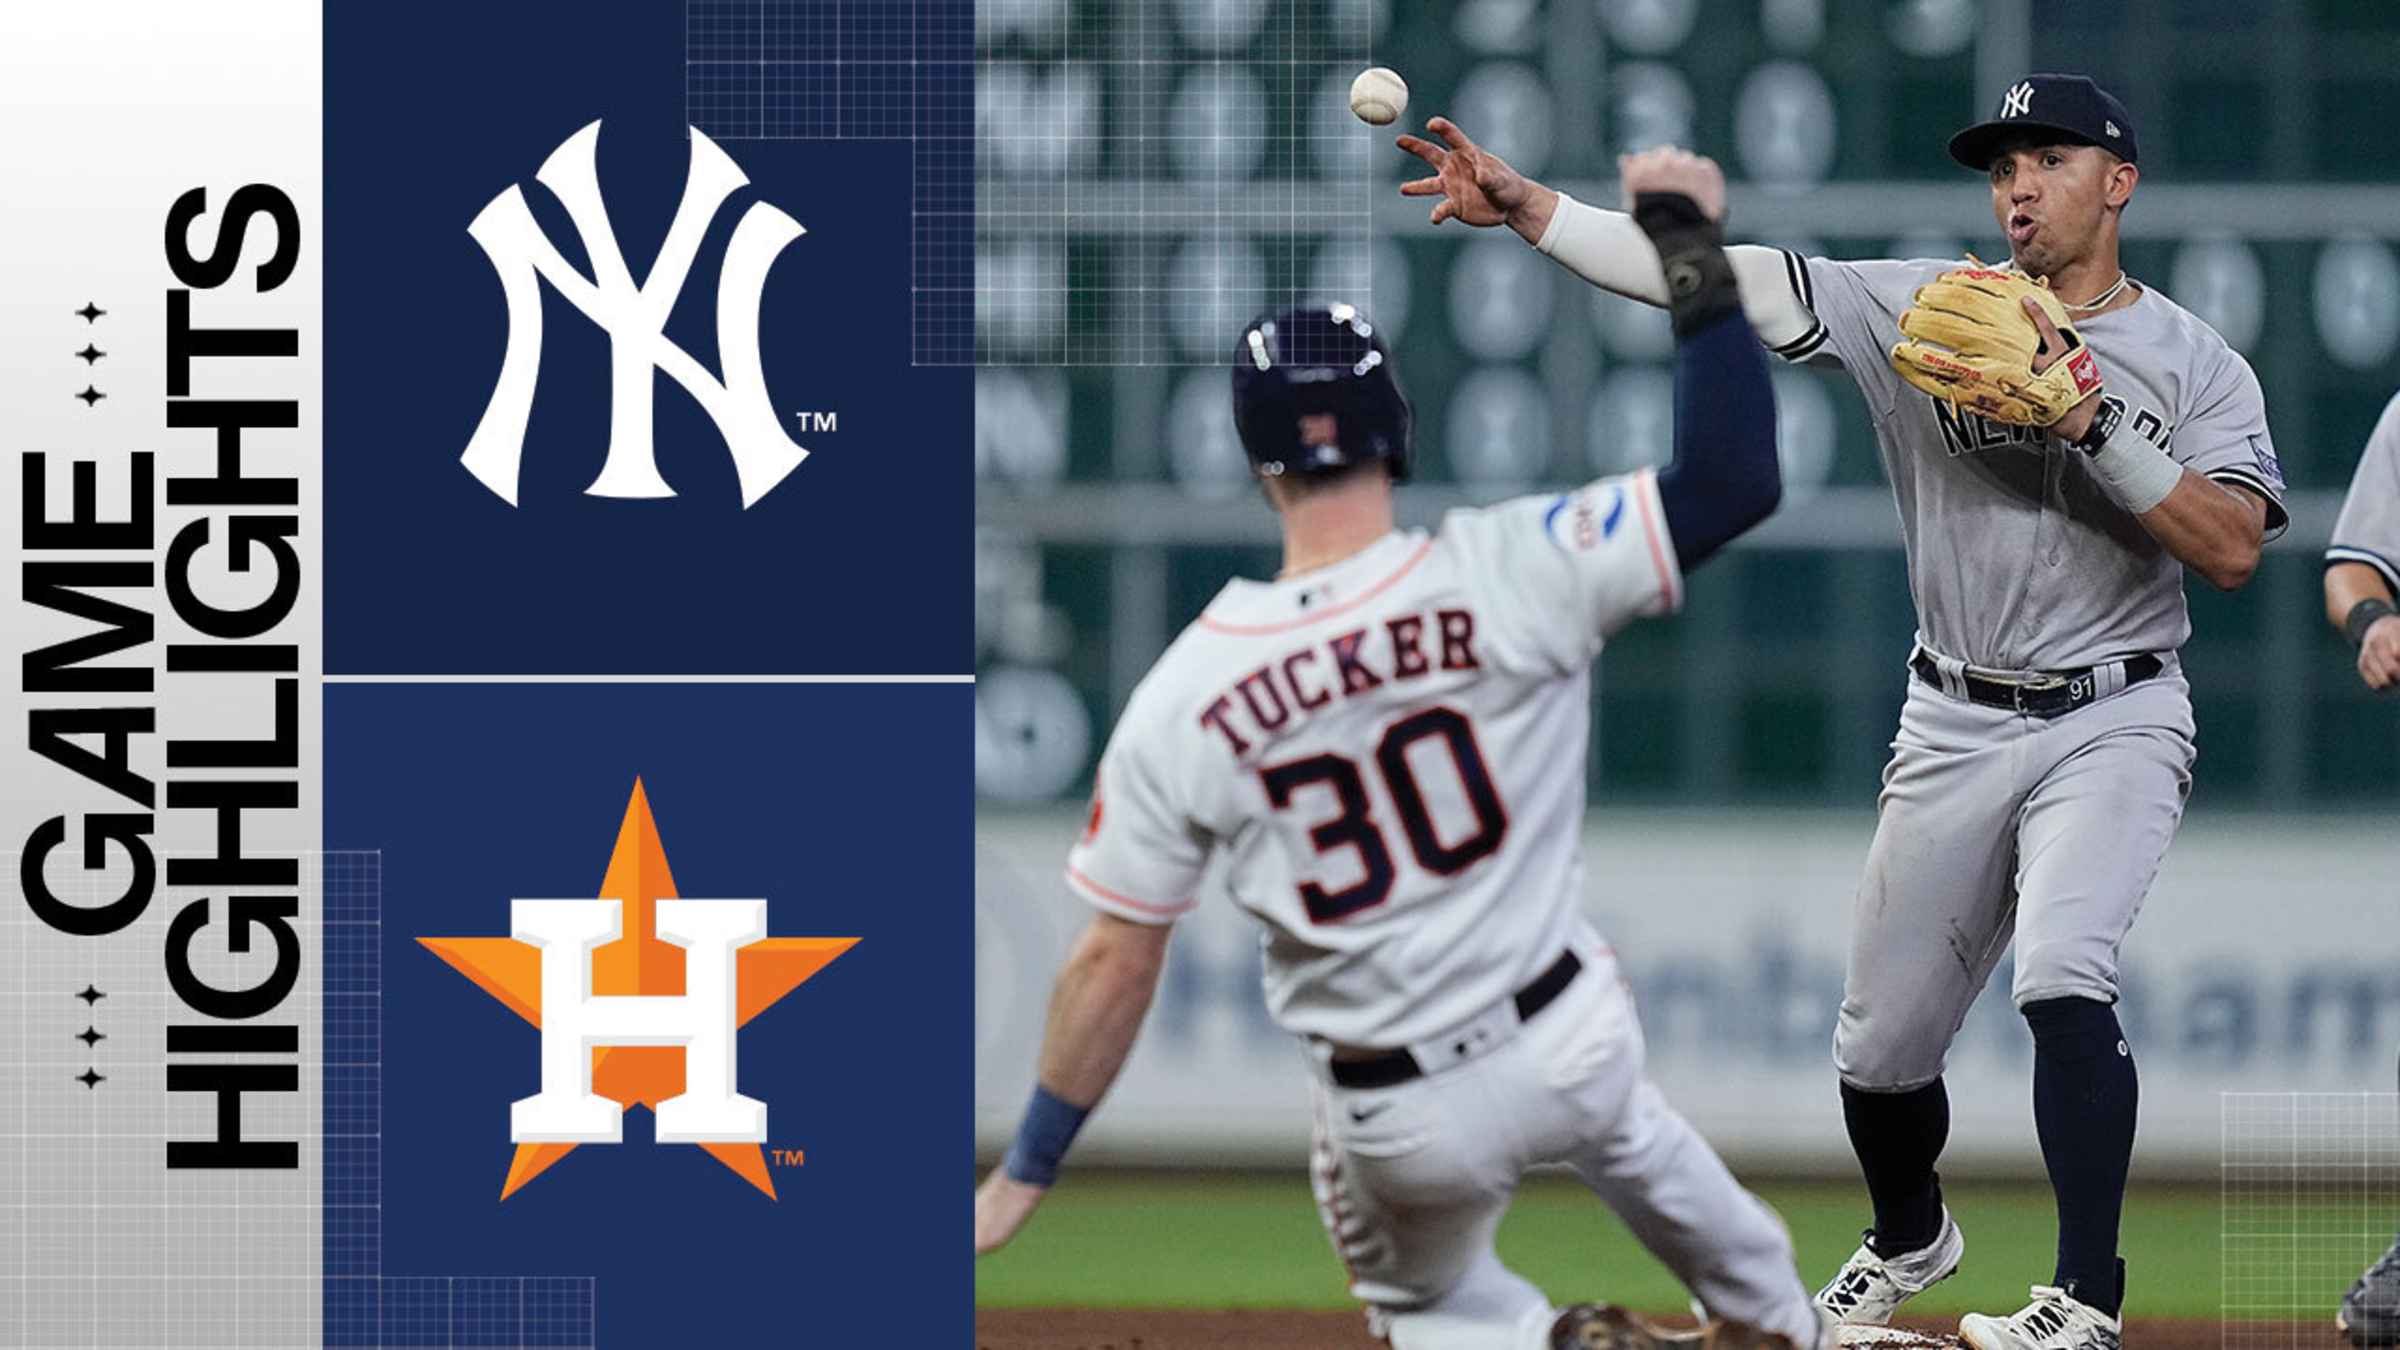 Astros vs. Yankees Game Highlights (8/4/23)